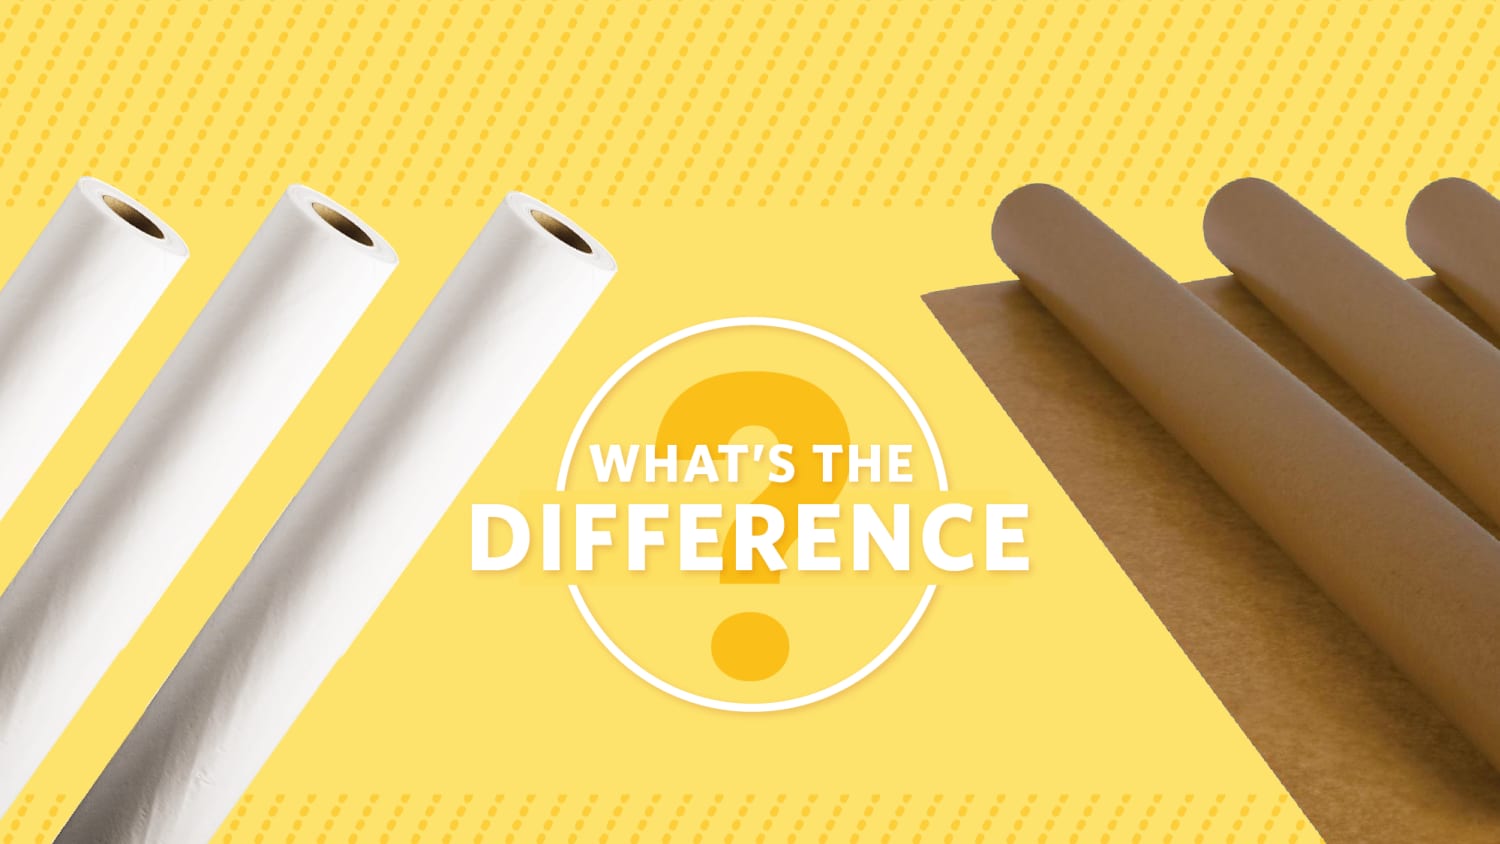 Wax Paper vs Parchment Paper: Here's the Difference